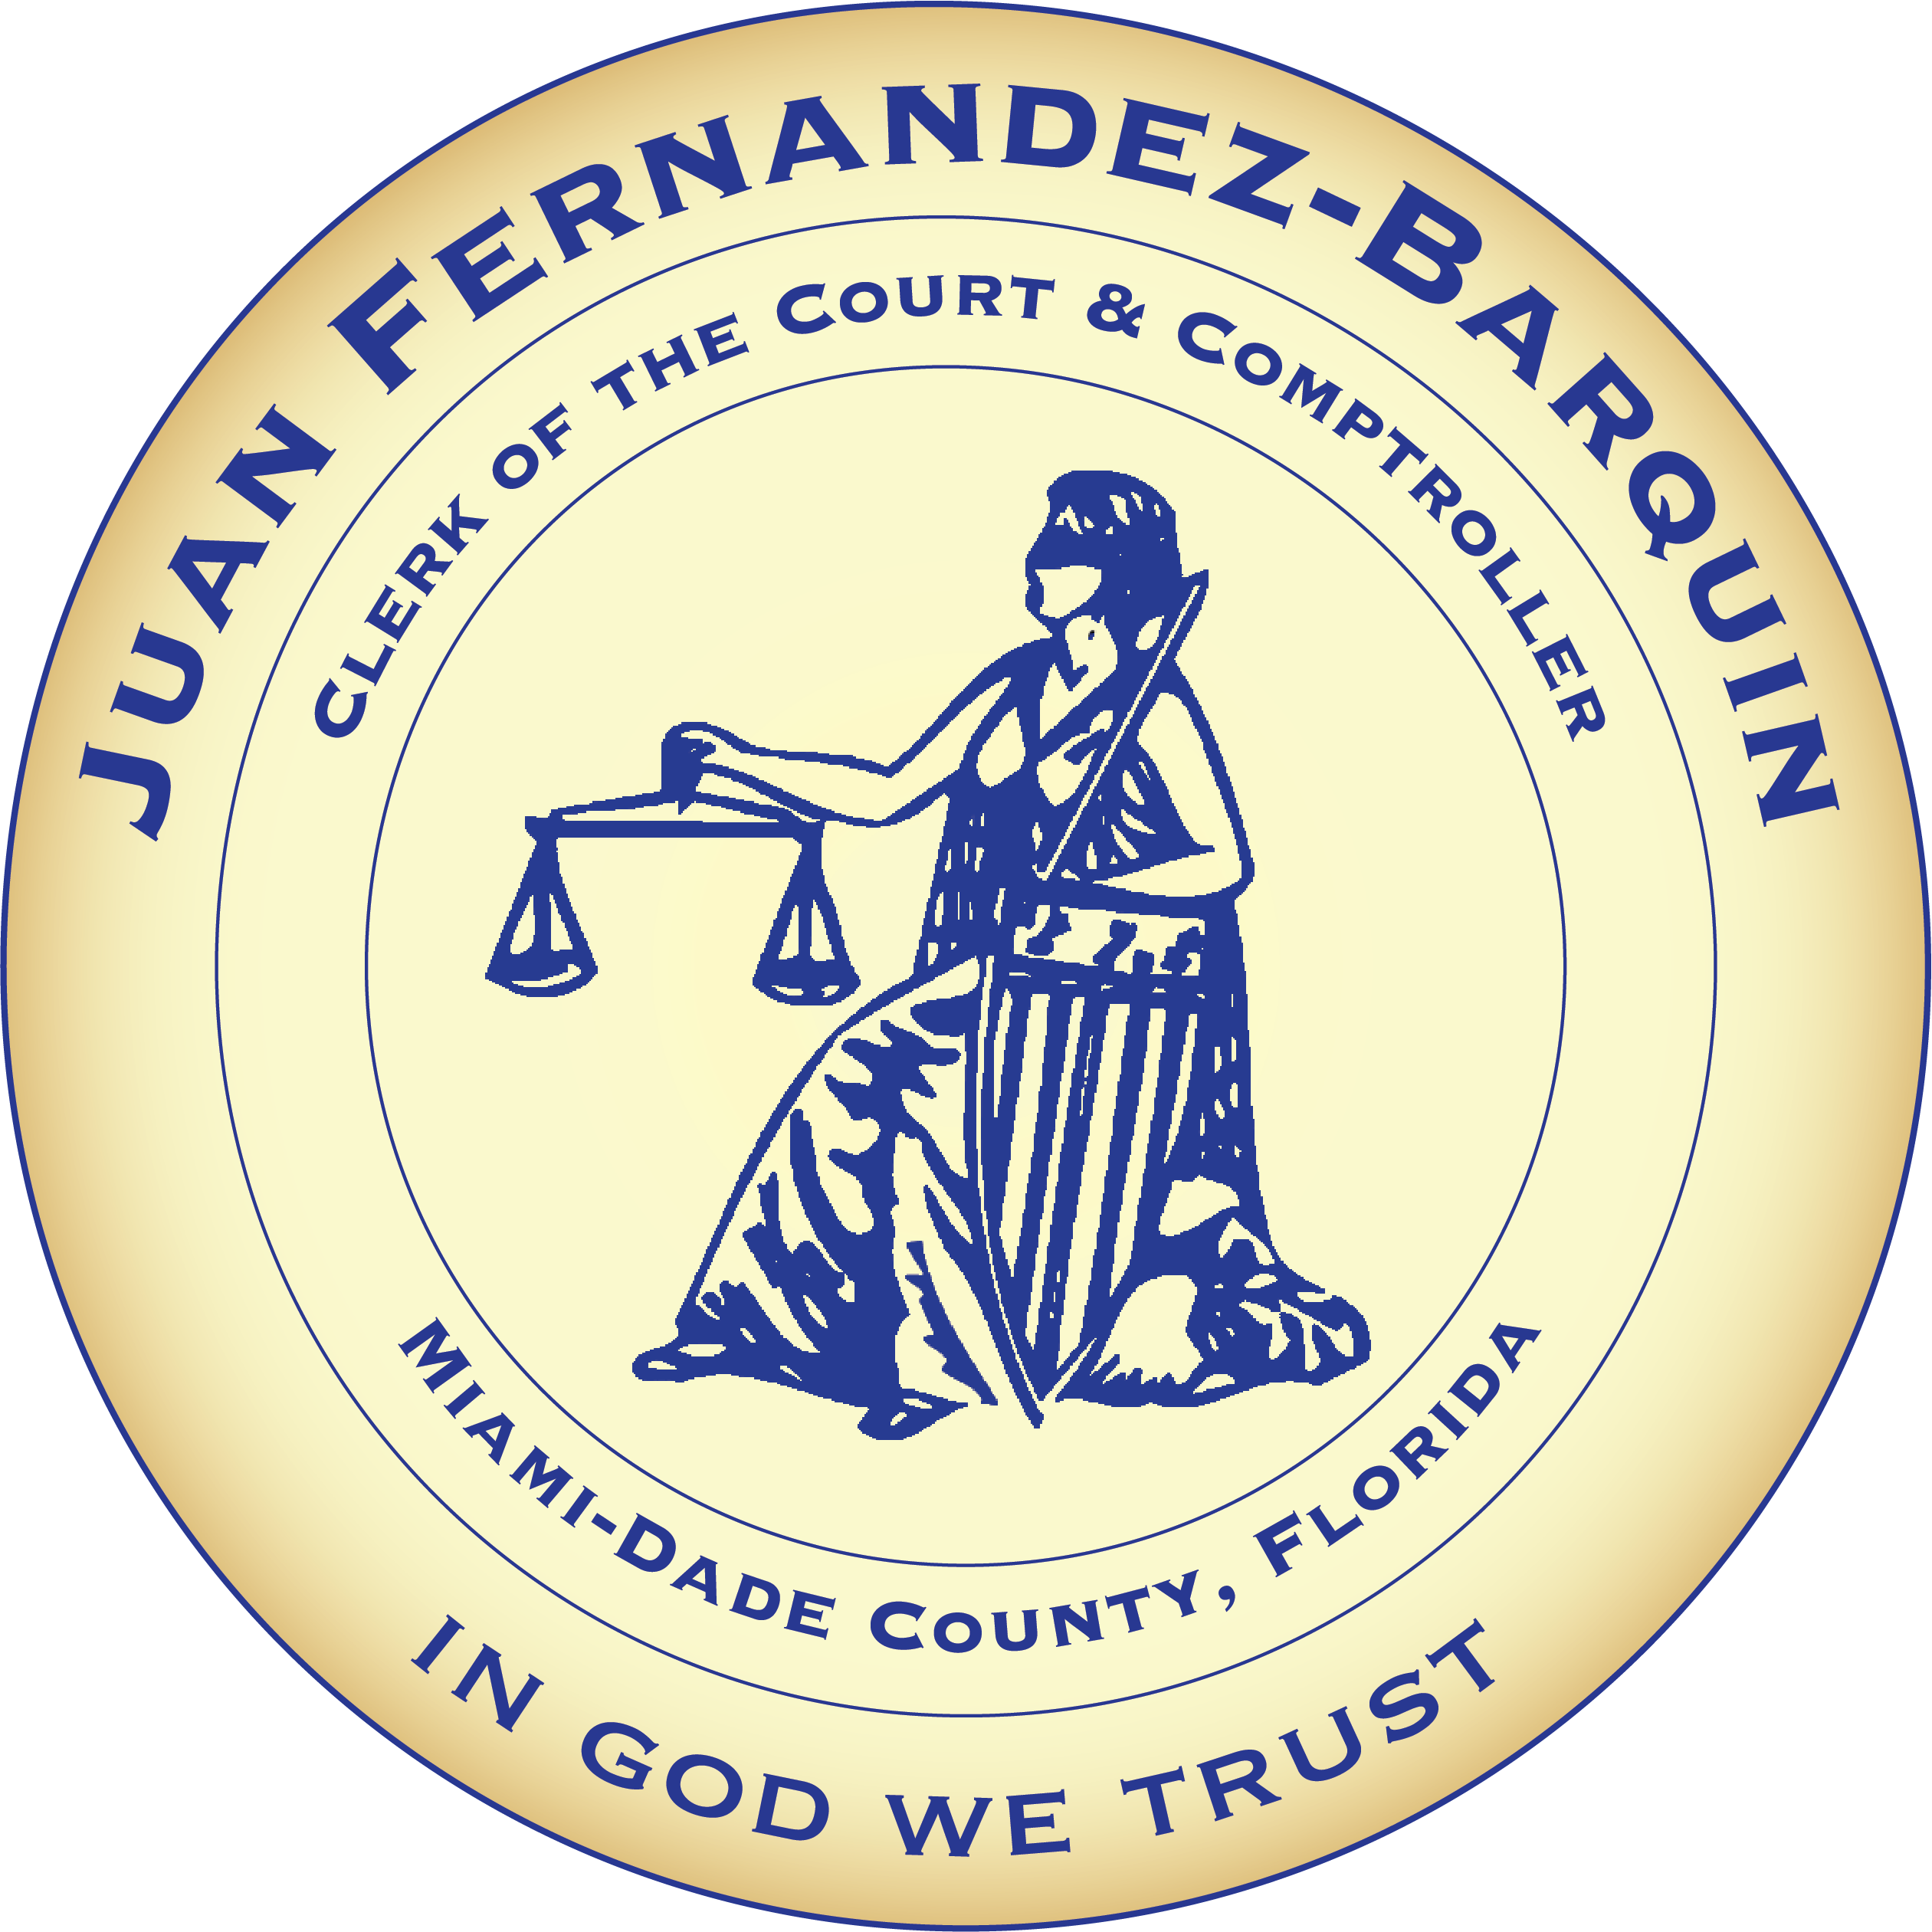 miami dade clerk of courts inmate search